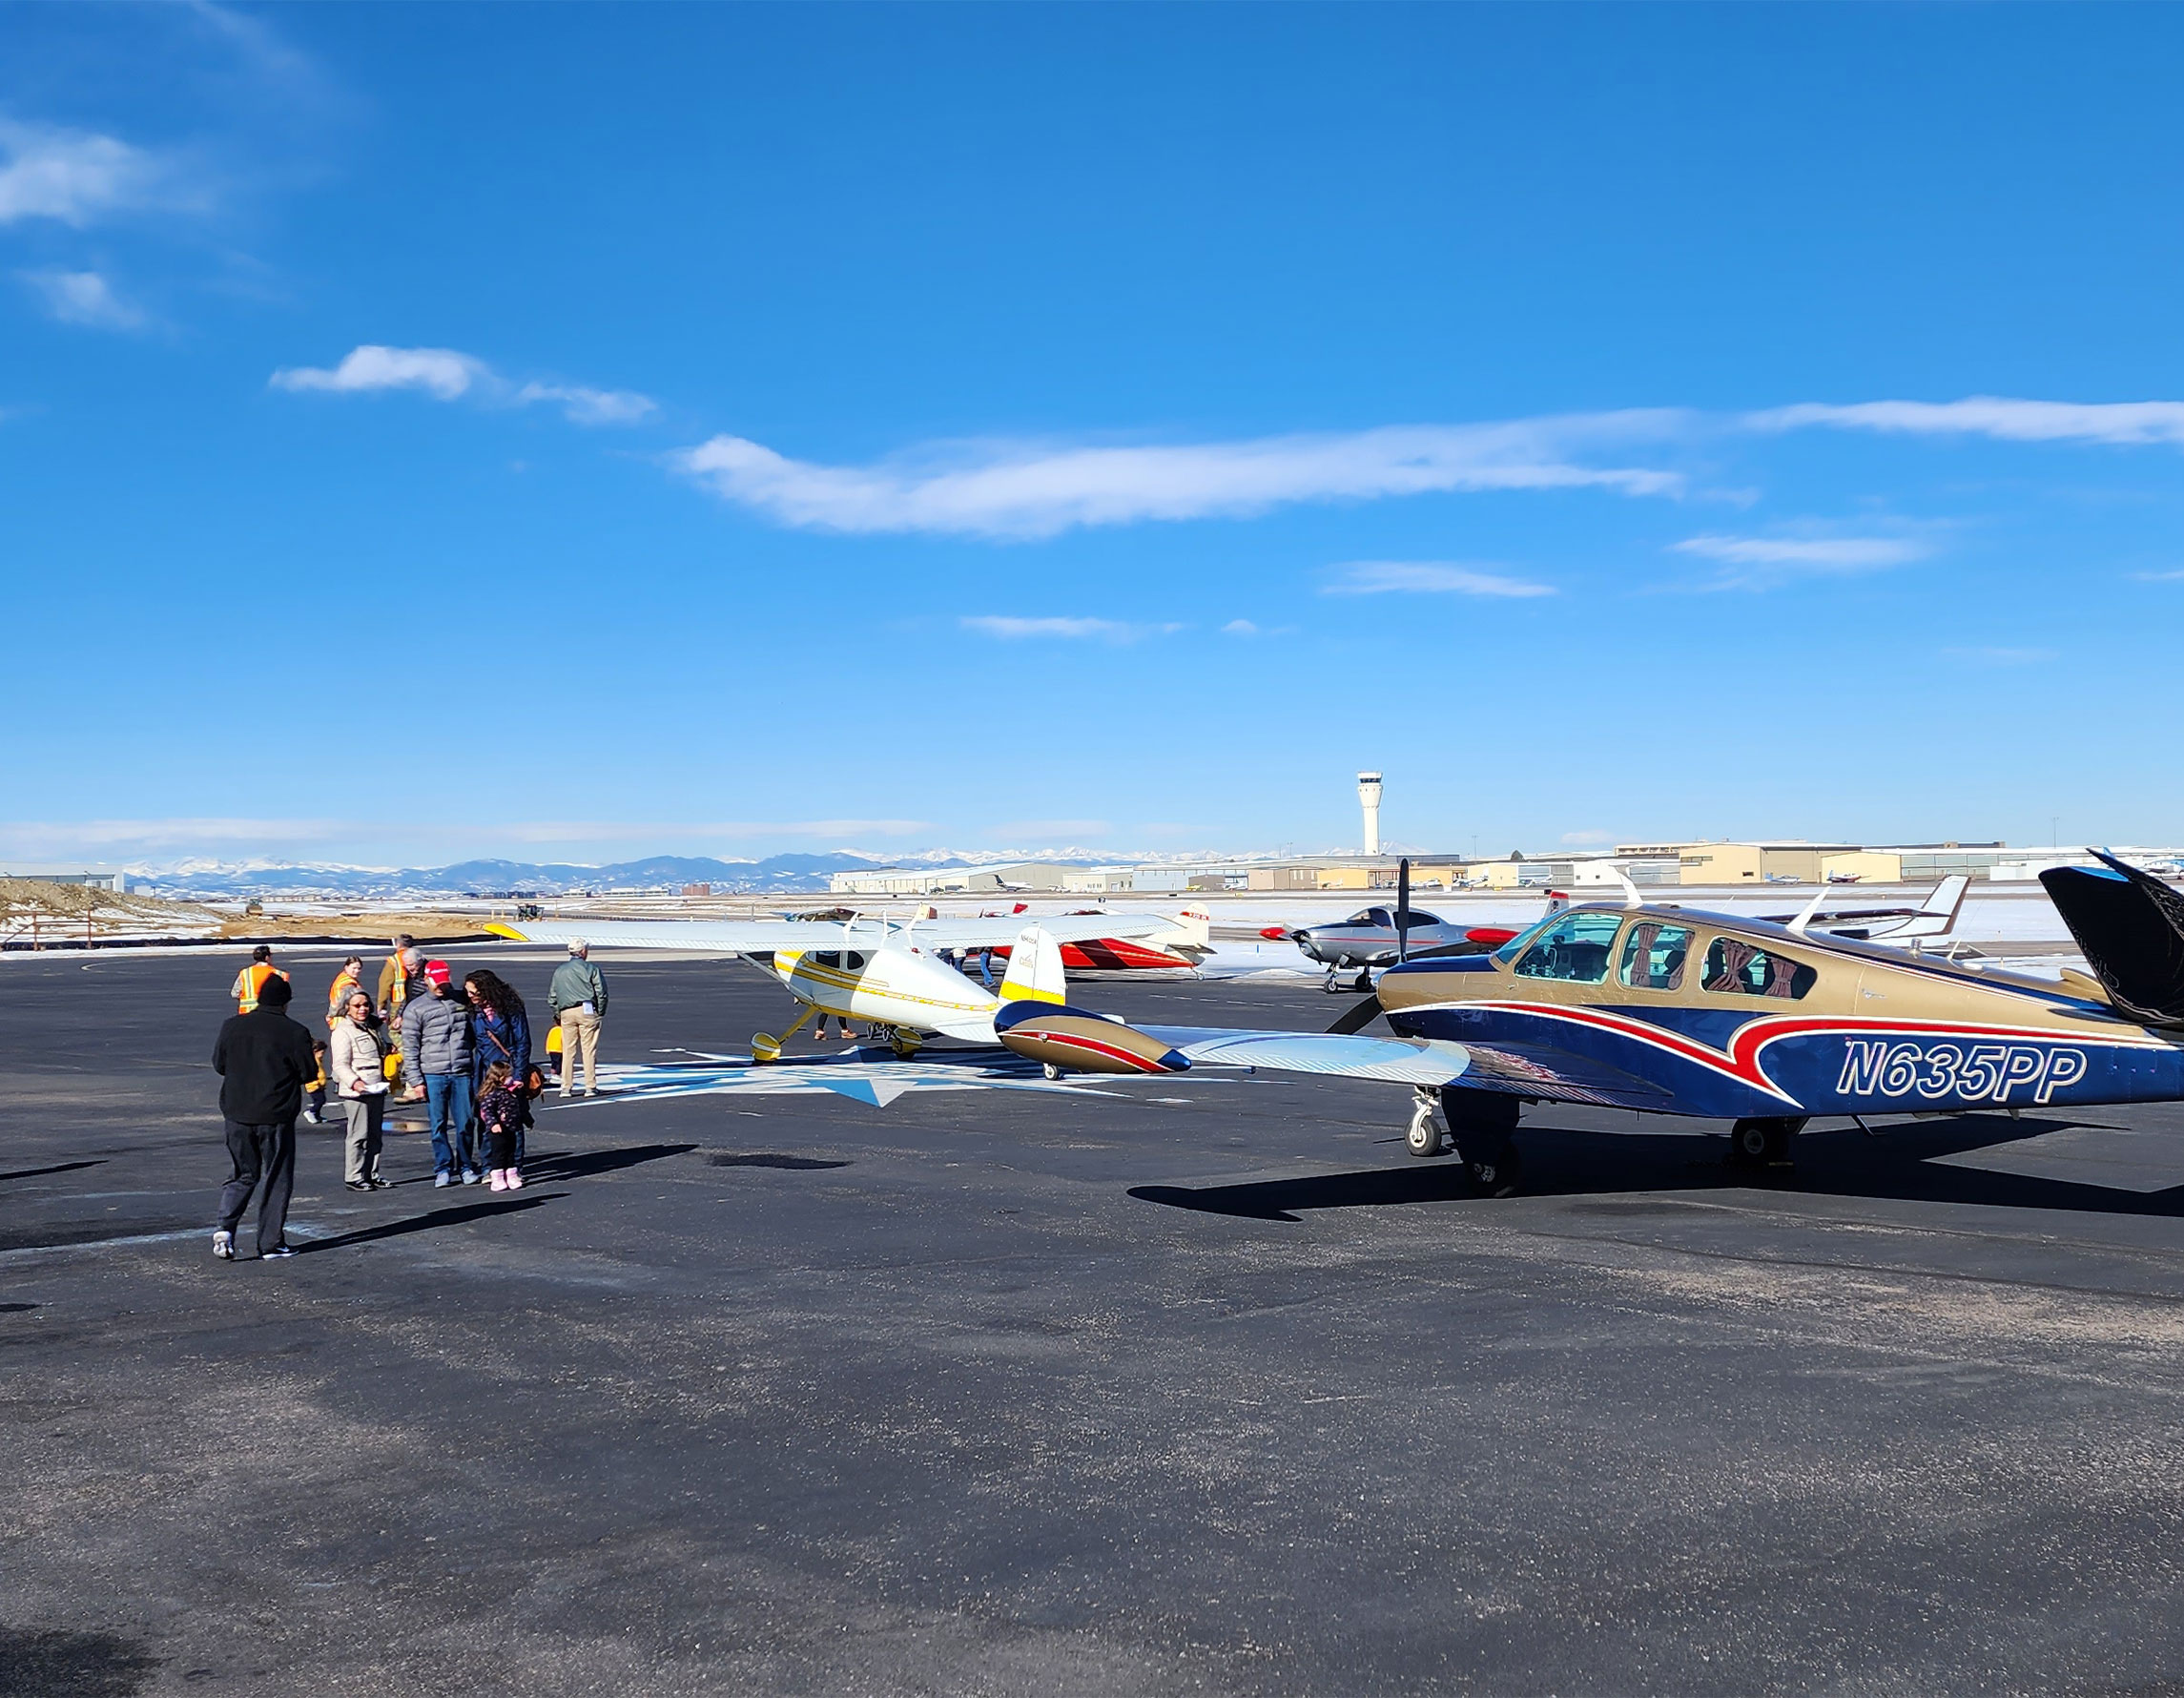 Guests on the ramp at Exploration of Flight surrounded by aircraft